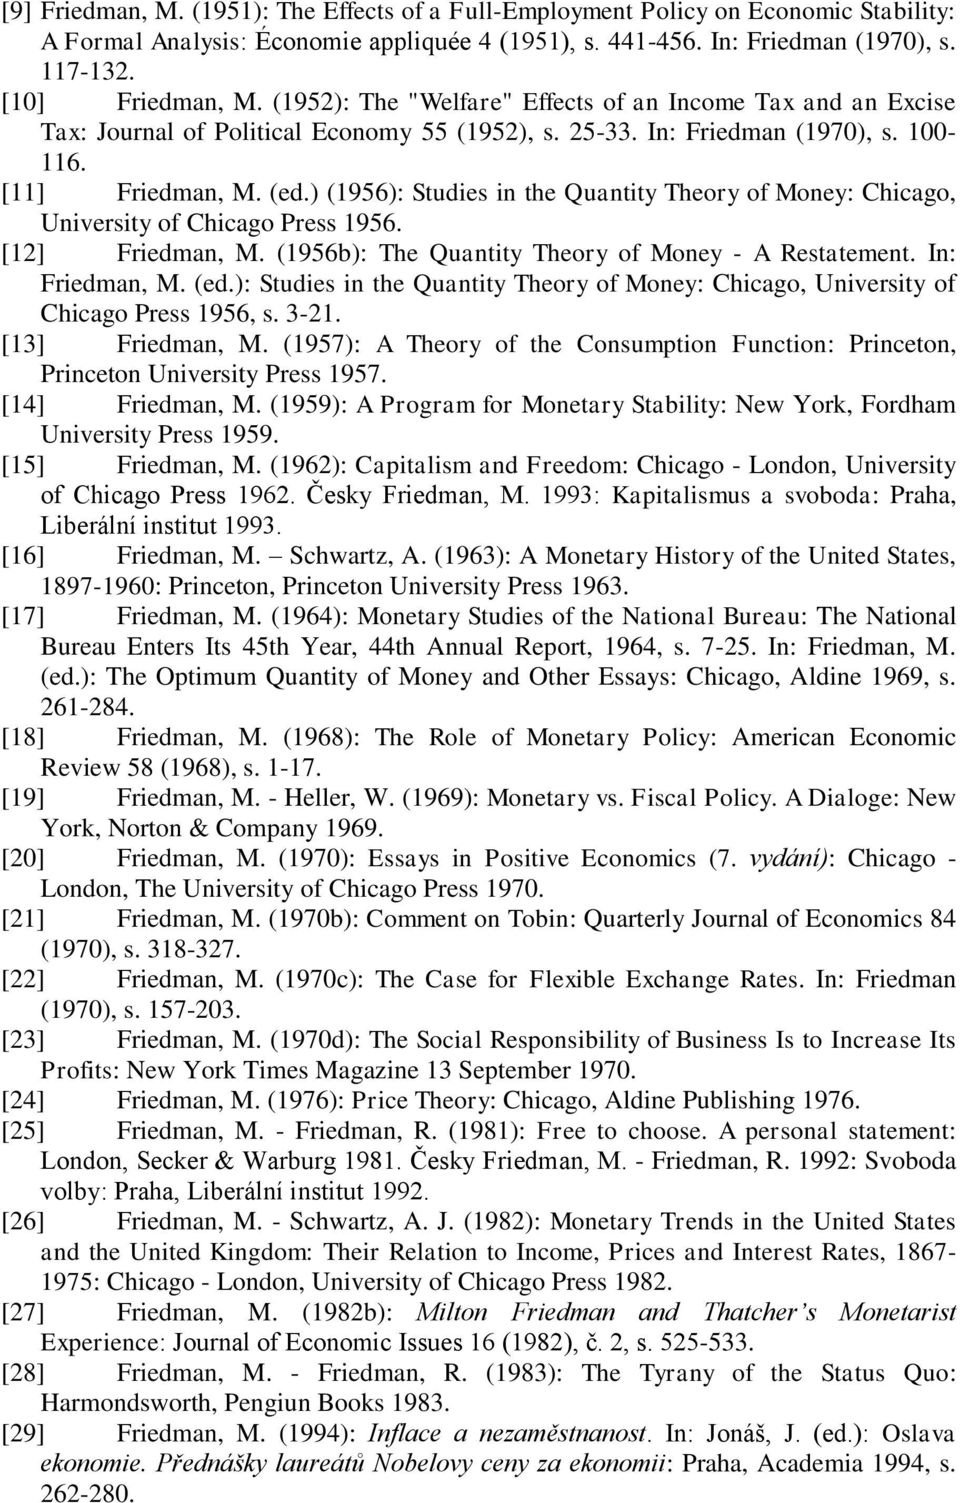 ) (1956): Studies in the Quantity Theory of Money: Chicago, University of Chicago Press 1956. [12] Friedman, M. (1956b): The Quantity Theory of Money - A Restatement. In: Friedman, M. (ed.